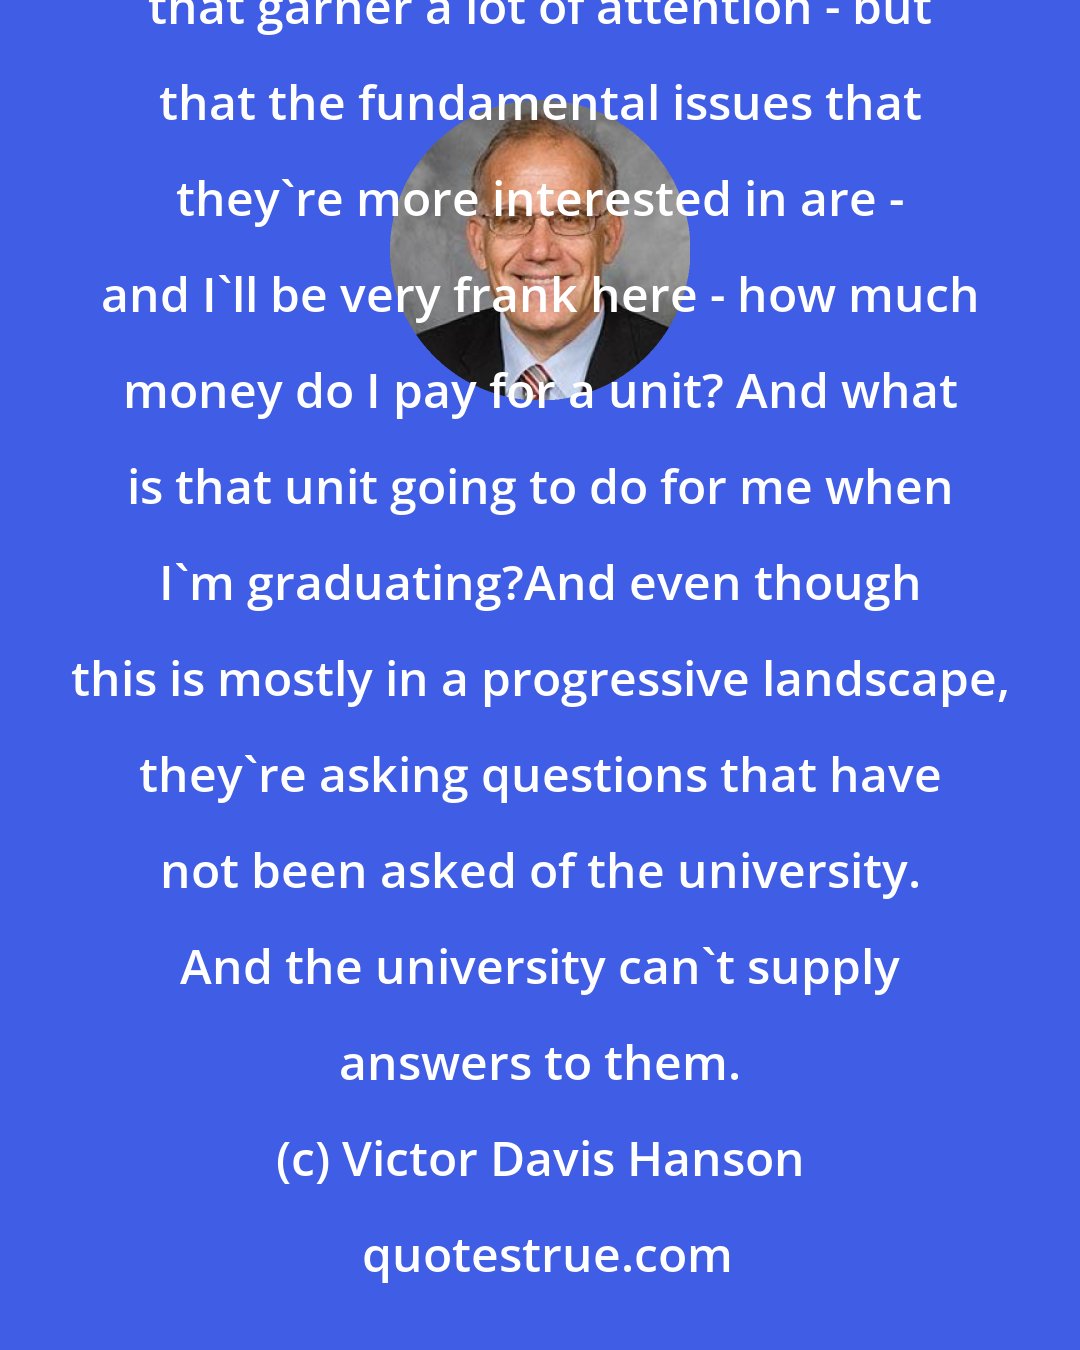 Victor Davis Hanson: I think there's a group of students - whether it's the micro-aggression or the safe space or the trigger warning that garner a lot of attention - but that the fundamental issues that they're more interested in are - and I'll be very frank here - how much money do I pay for a unit? And what is that unit going to do for me when I'm graduating?And even though this is mostly in a progressive landscape, they're asking questions that have not been asked of the university. And the university can't supply answers to them.